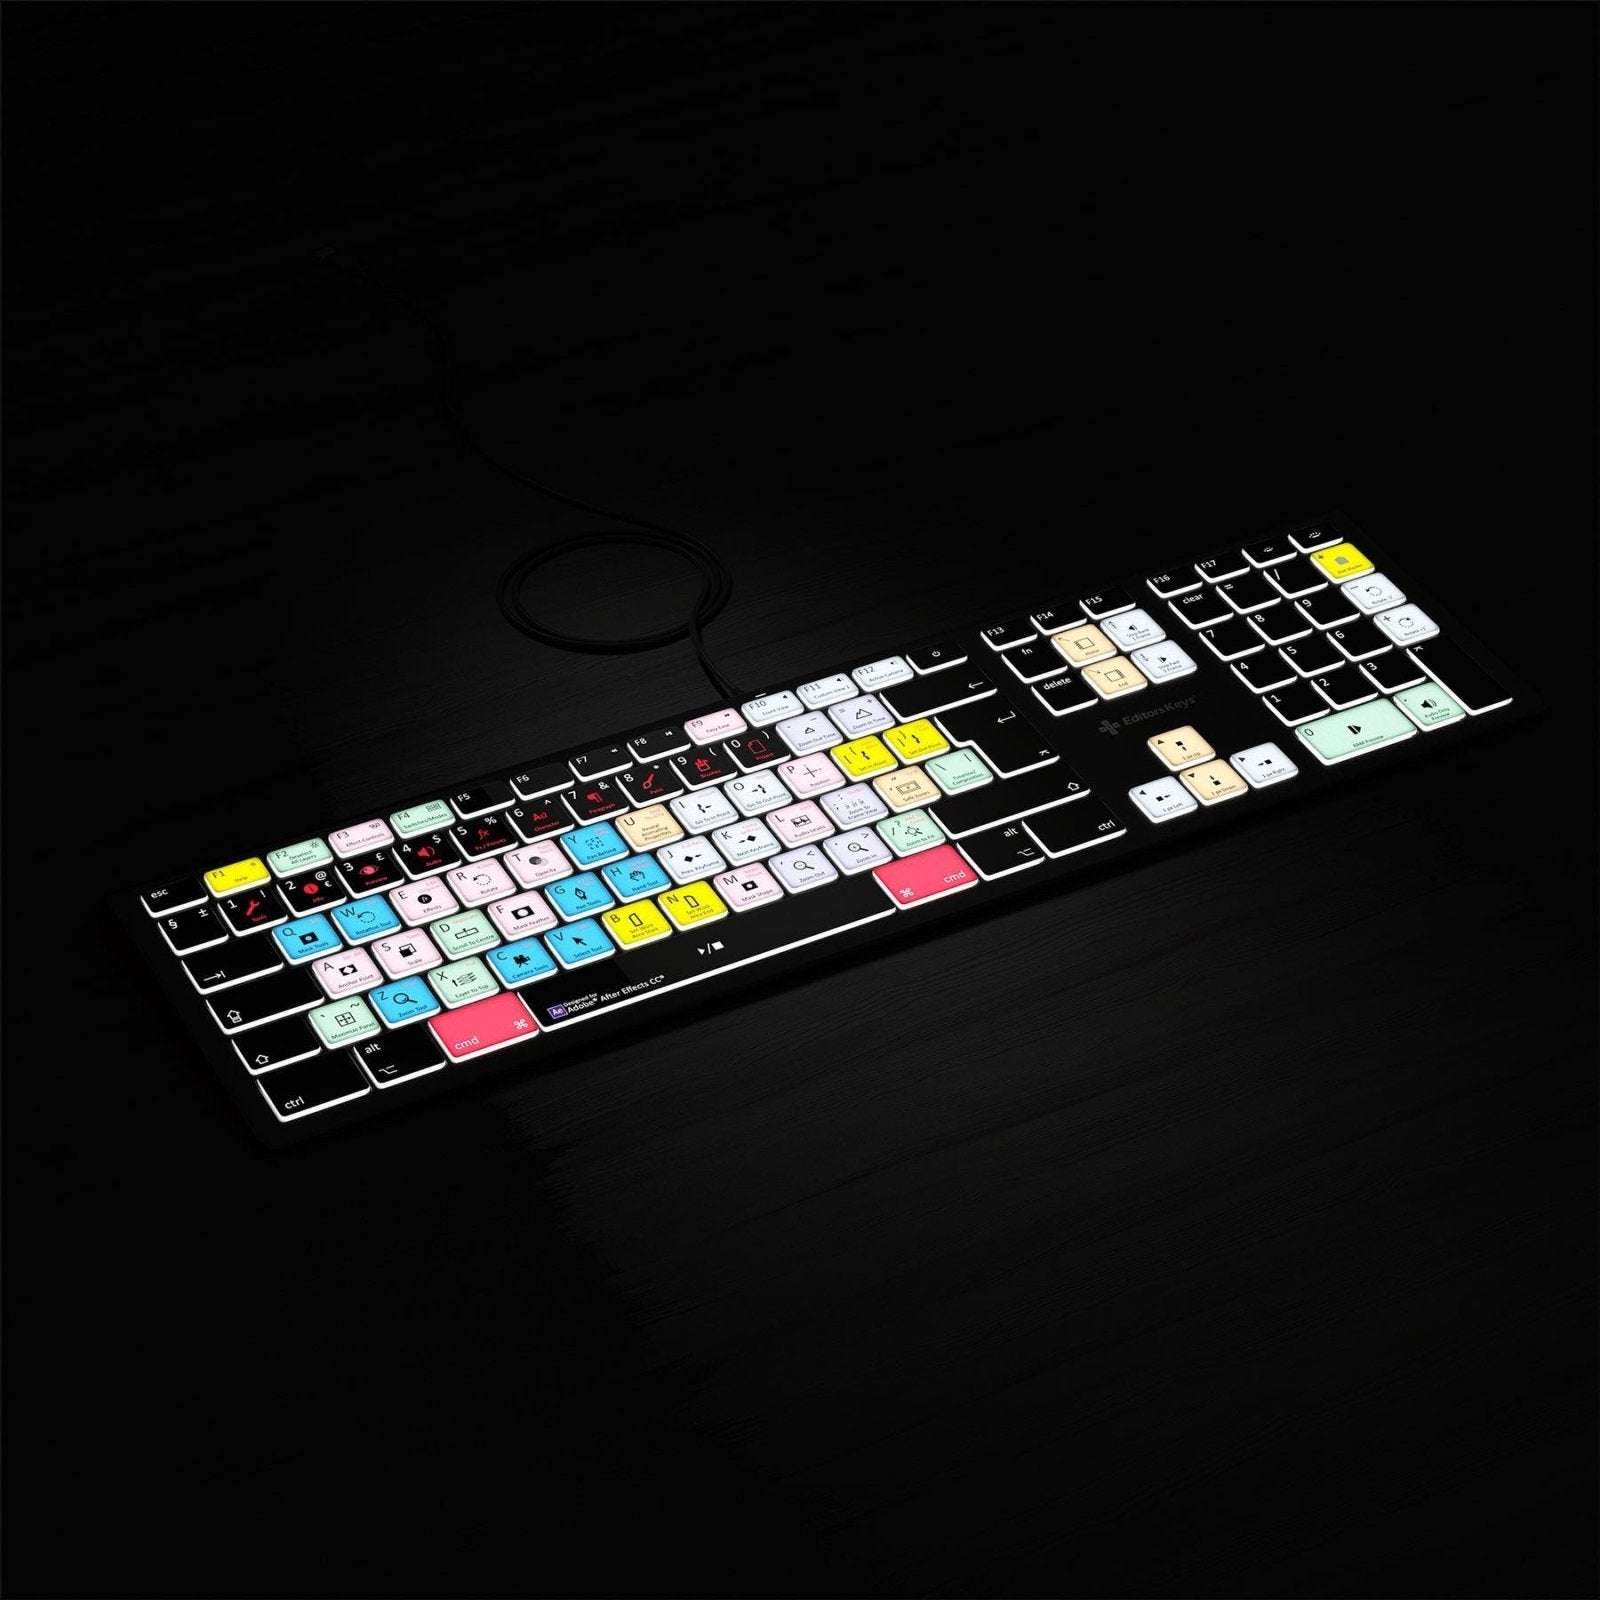 Adobe After Effects Keyboard - Backlit - For Mac or PC